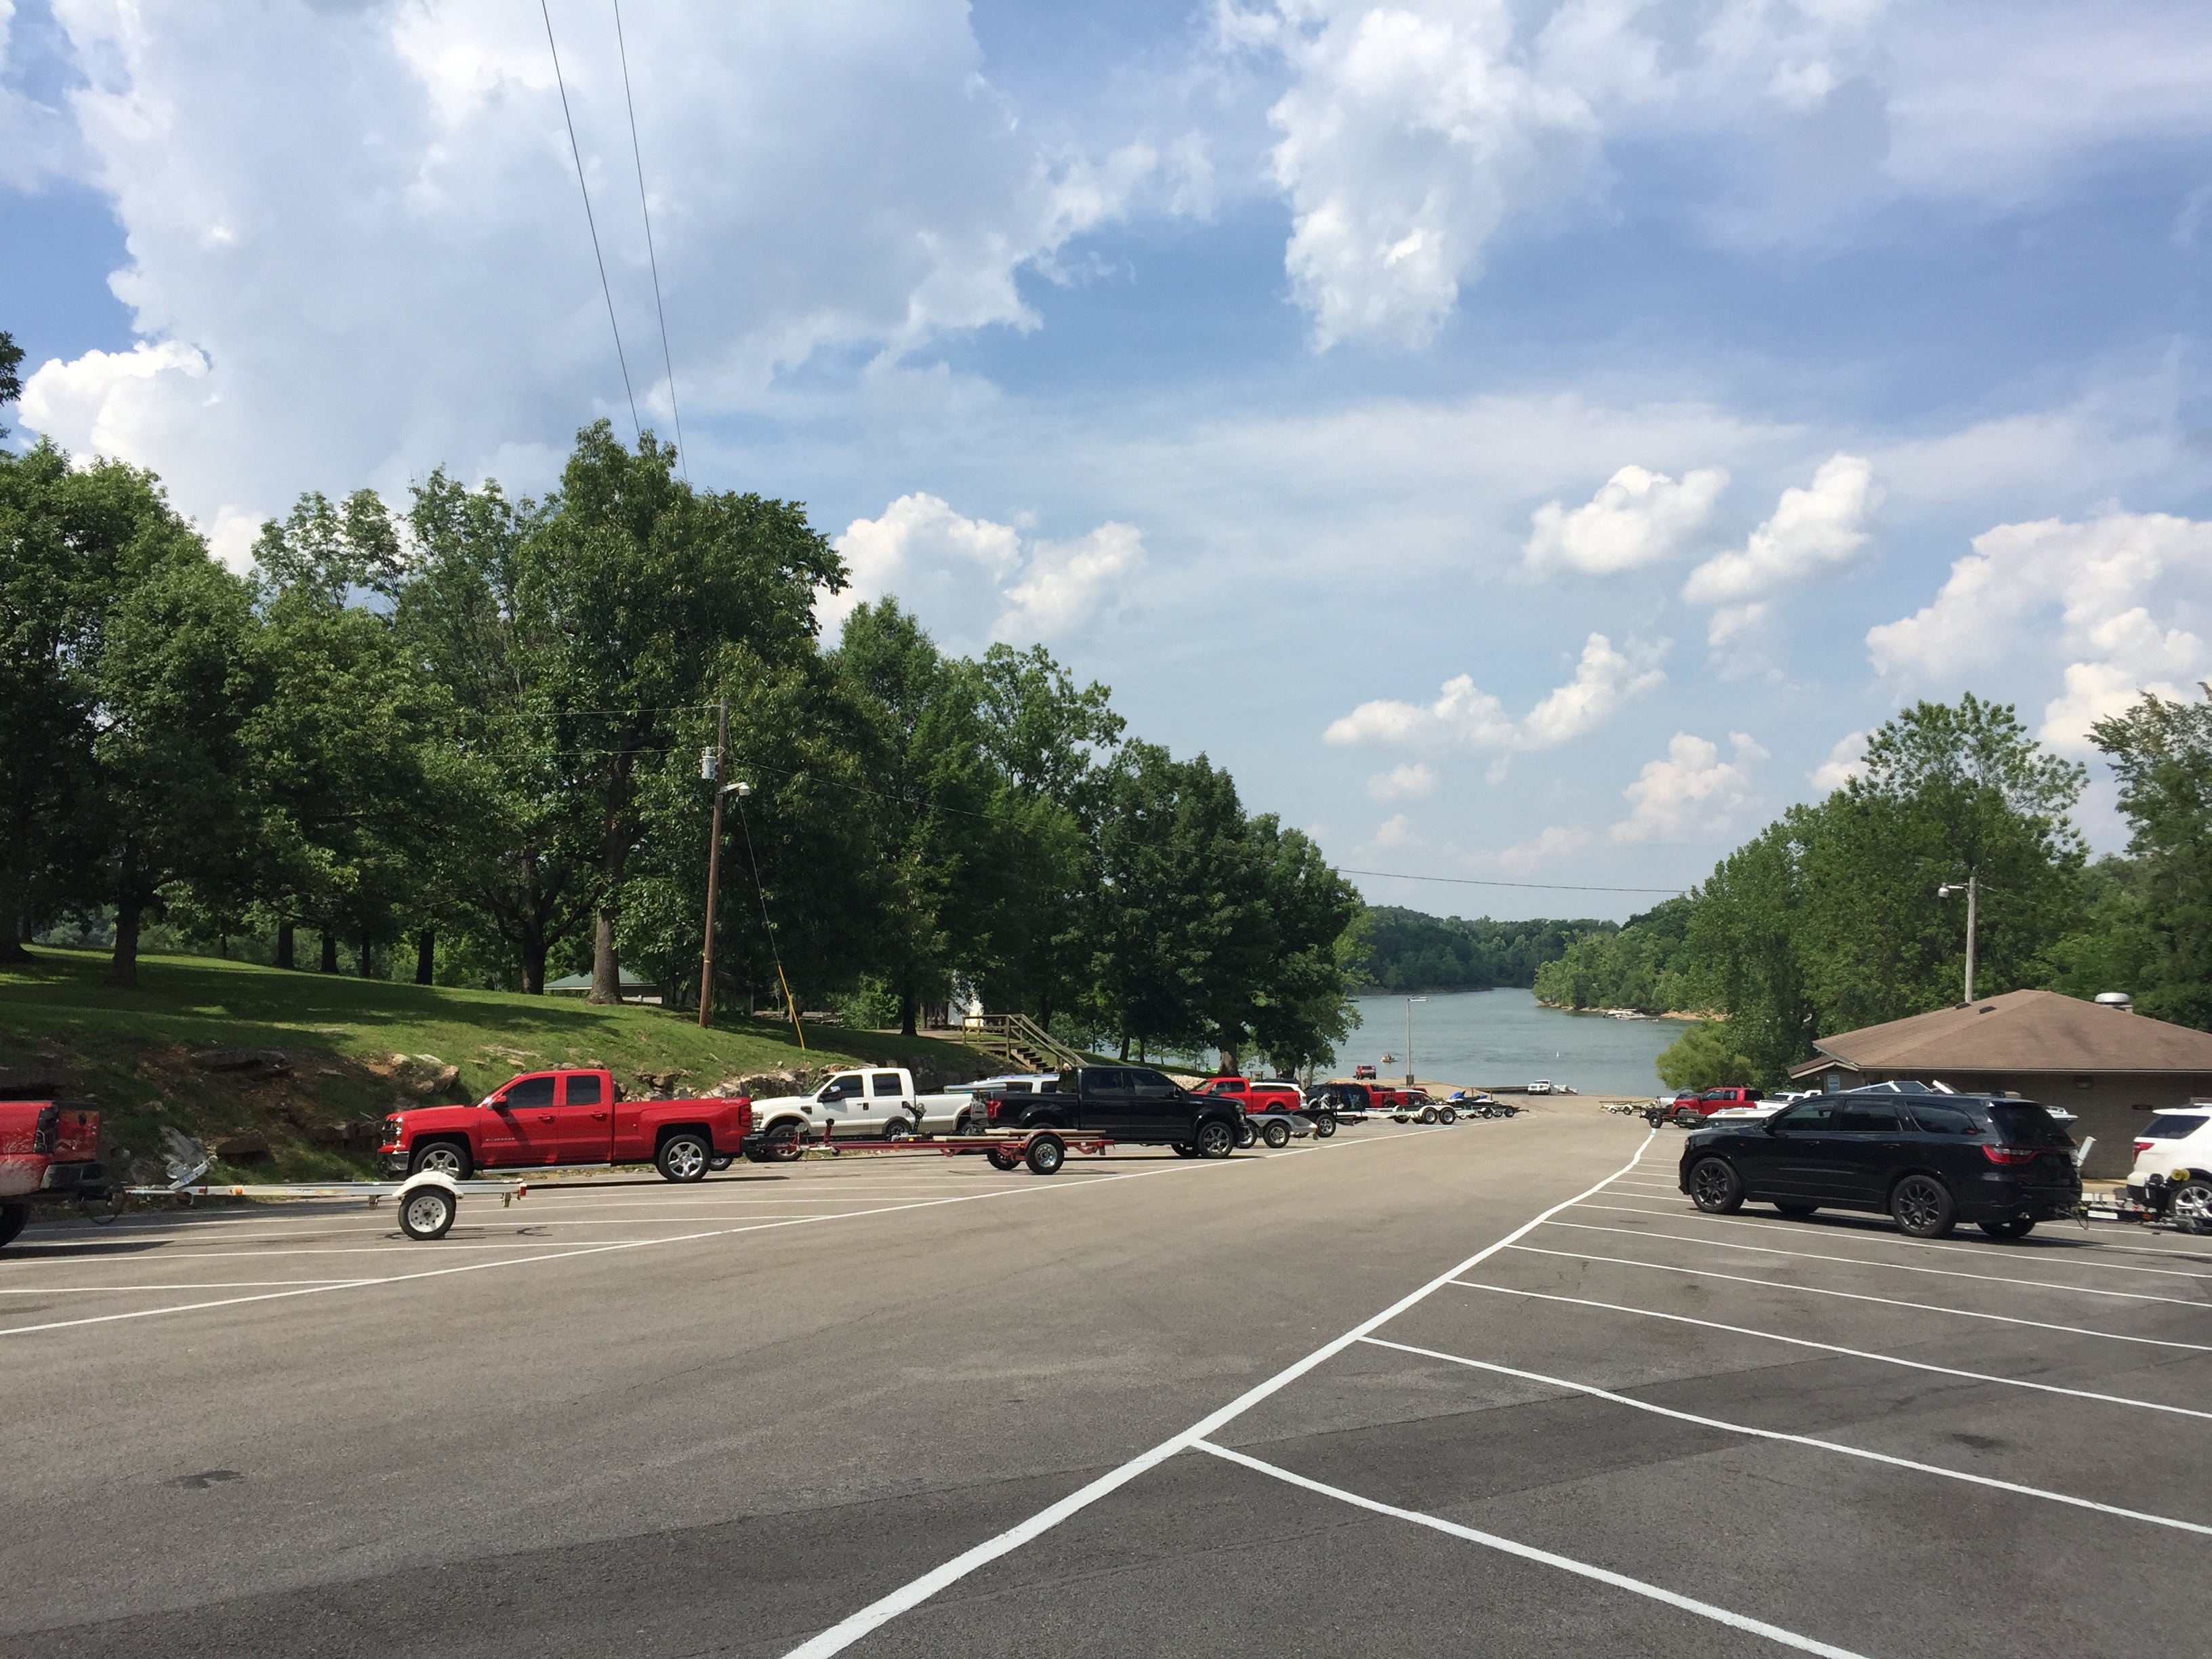 The boat ramp and parking